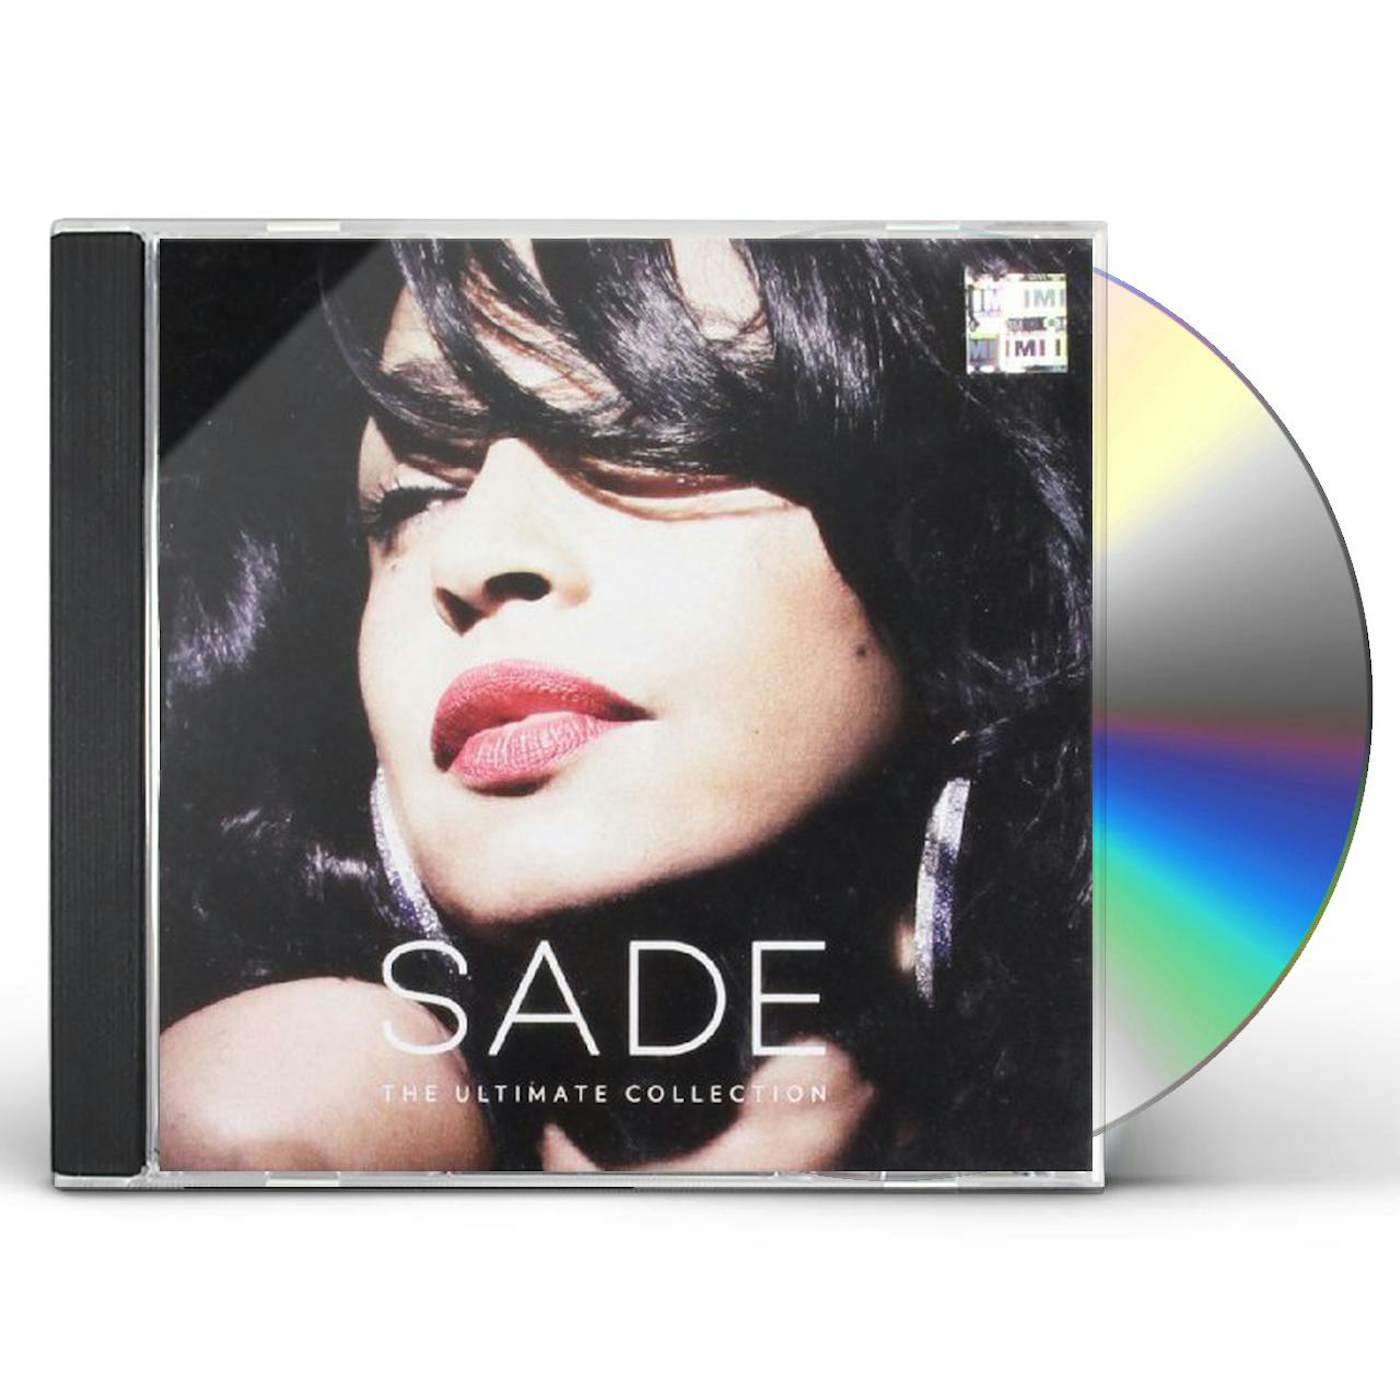 Sade ULTIMATE COLLECTION CD